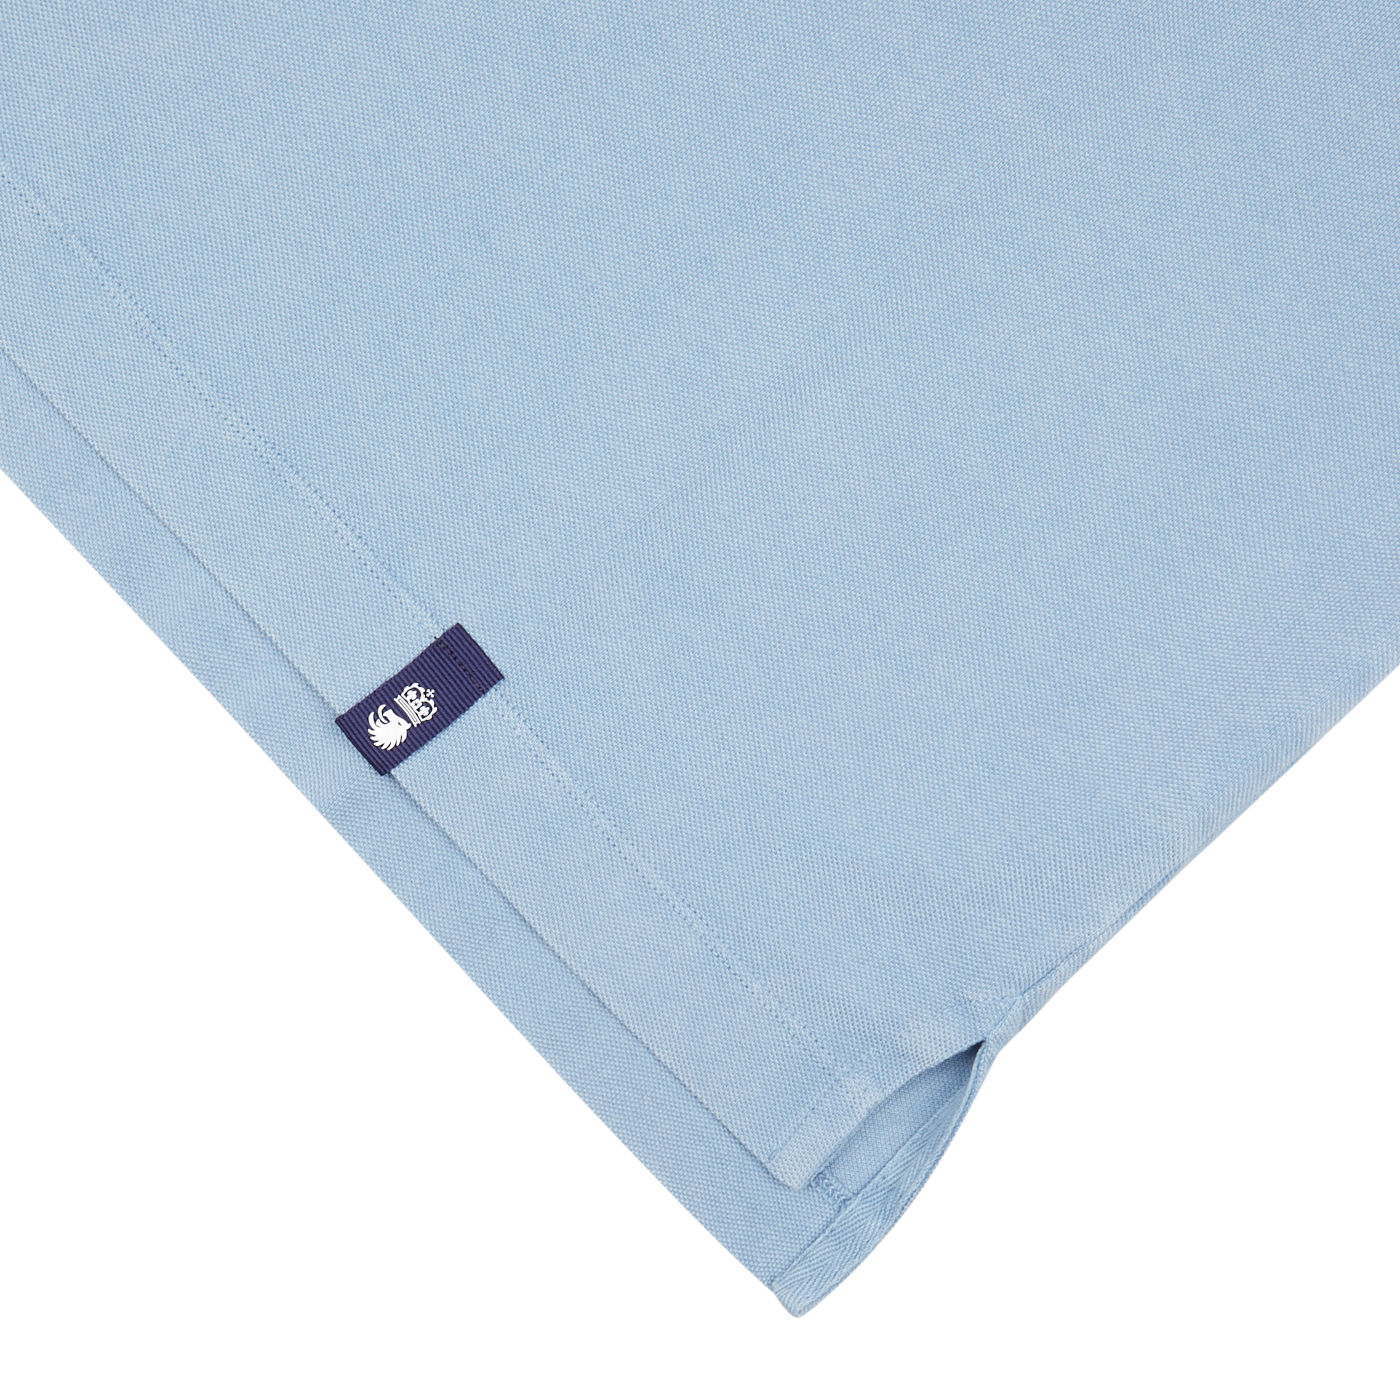 Sky Blue Cotton Piquet Polo Shirt fabric with a Drumohr clothing label from Italy.